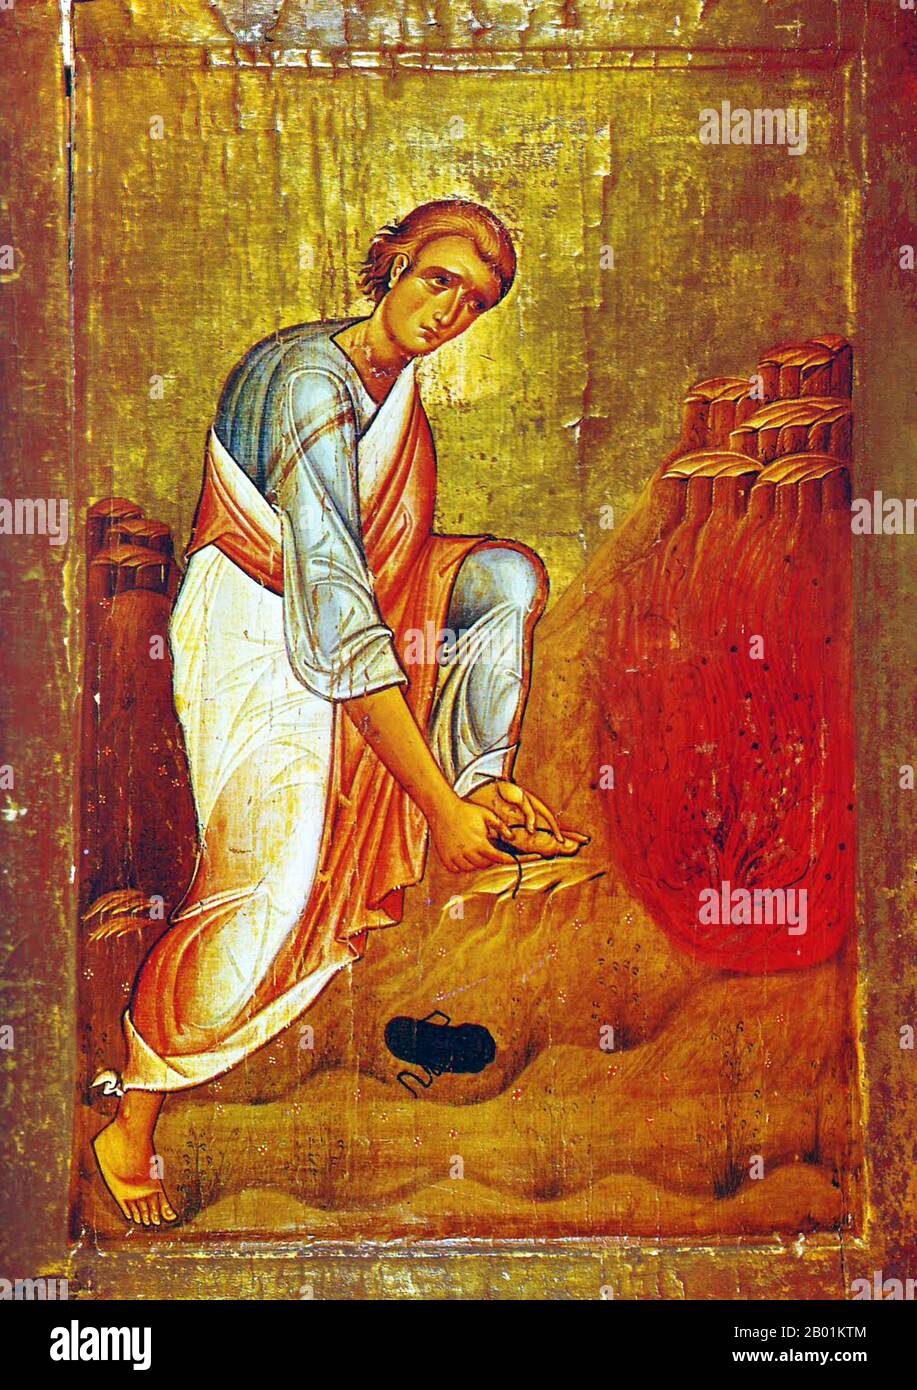 Egypt: 'Moses and the Burning Bush'. Sacred icon from St Catherine's Monastery, Sinai, 12th or 13th century.  The burning bush is an object described by the Book of Exodus (3:1-21) as being located on Mount Sinai; according to the narrative, the bush was on fire, but was not consumed by the flames, hence the name.  In the narrative, the burning bush is the location at which Moses was appointed by God to lead the Israelites out of Egypt and into Canaan. Stock Photo